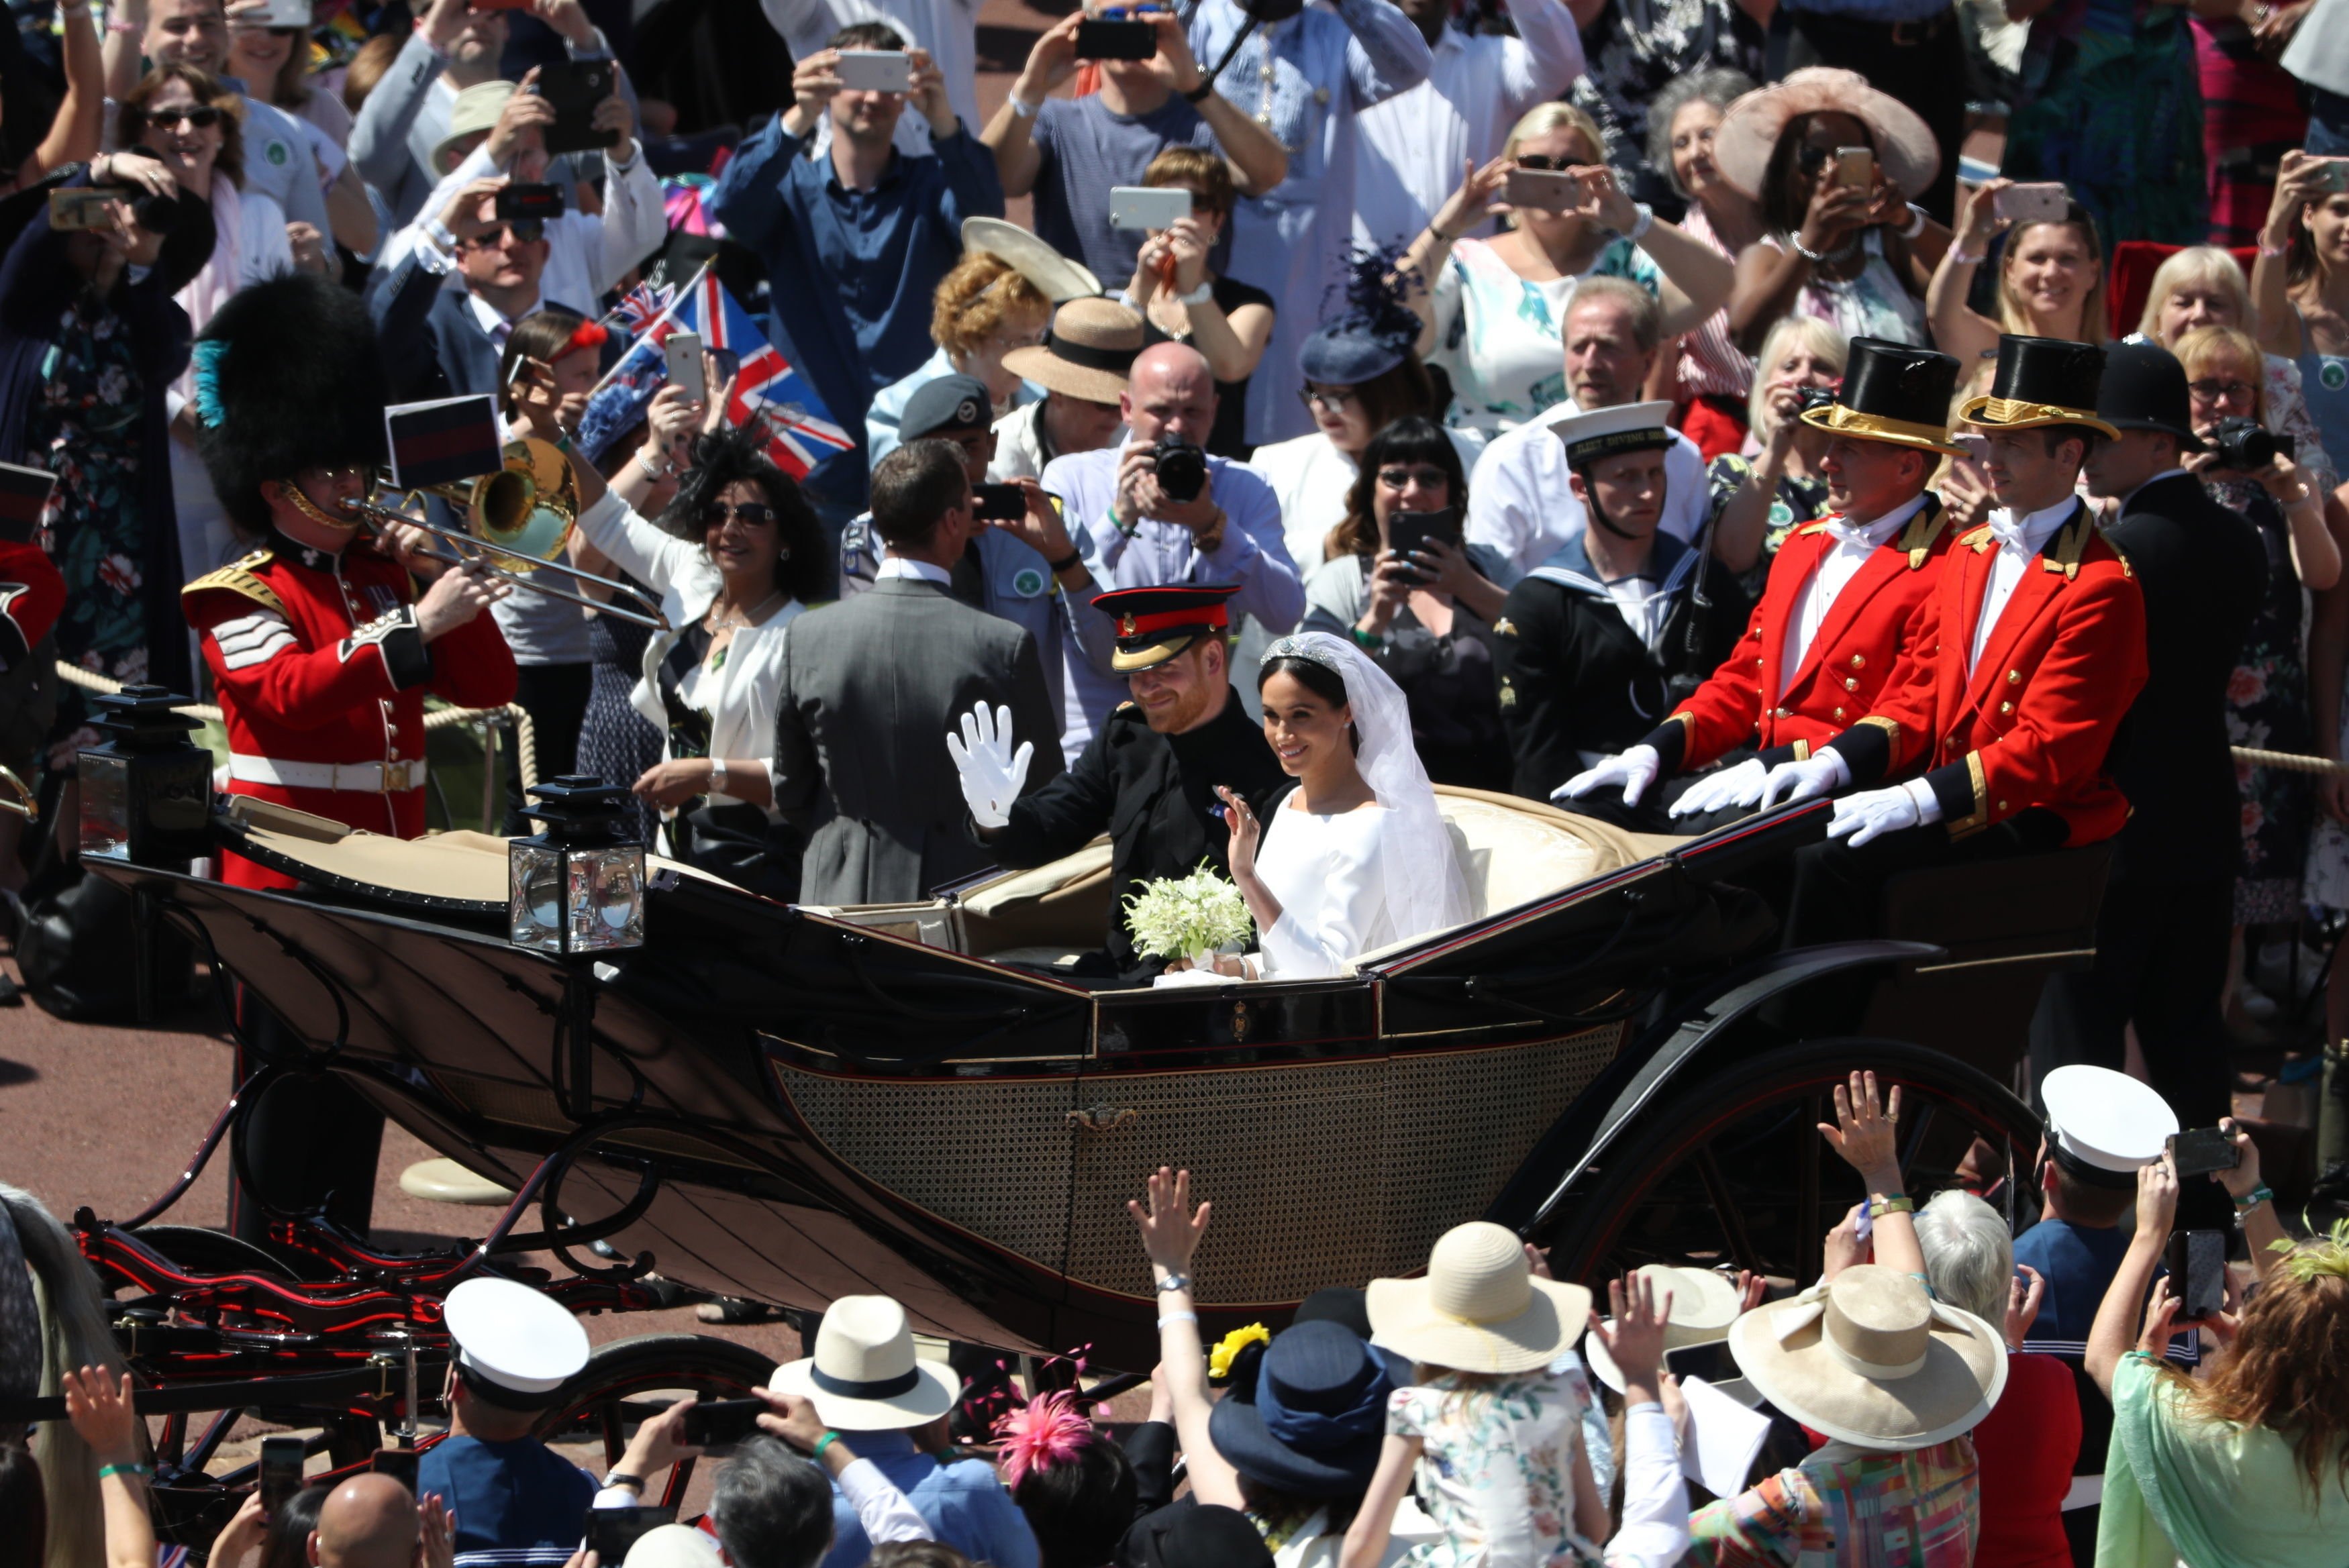 Crowds cheer for newlyweds, Prince Harry and Meghan Markle in the Ascot Landau carriage on May 19, 2018 in Windsor, England. | Source: Getty Images 